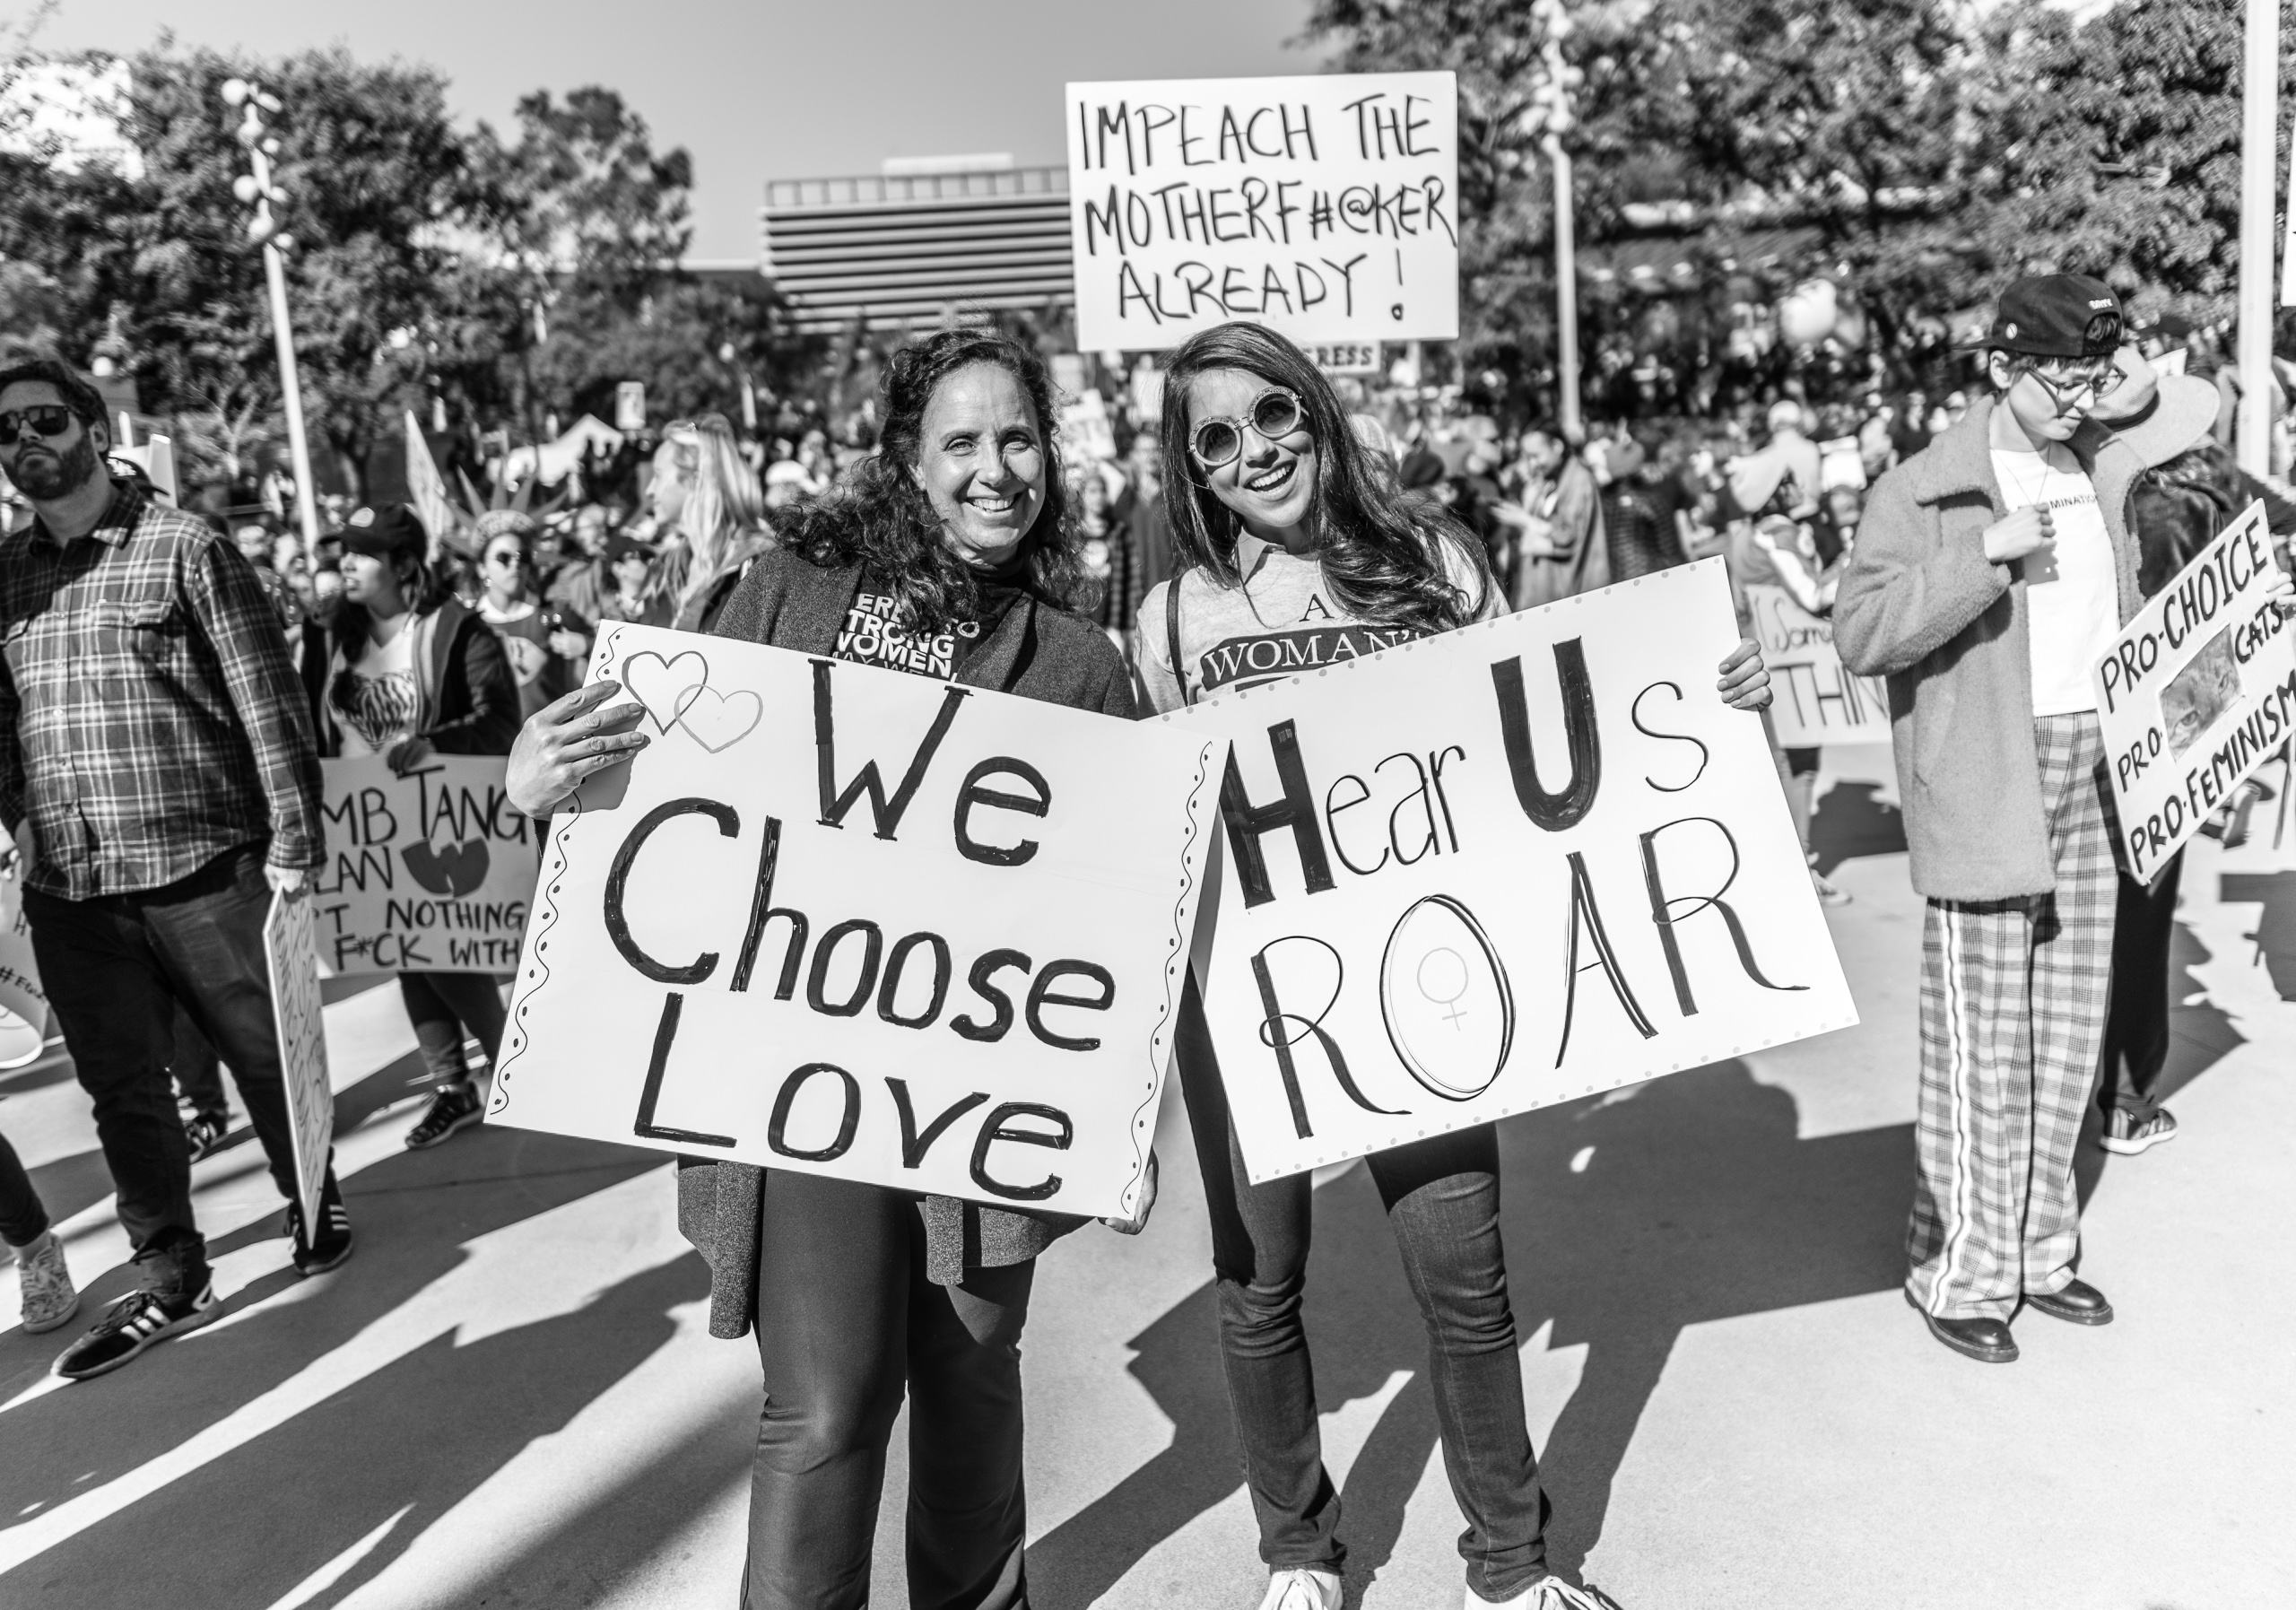 Two women standing together. One holds a sign that reads "We Choose Love". The other holds a sign that reads "Hear Us Roar".  Behind them another person holds up a sign reading "Impeach the motherfucker already"